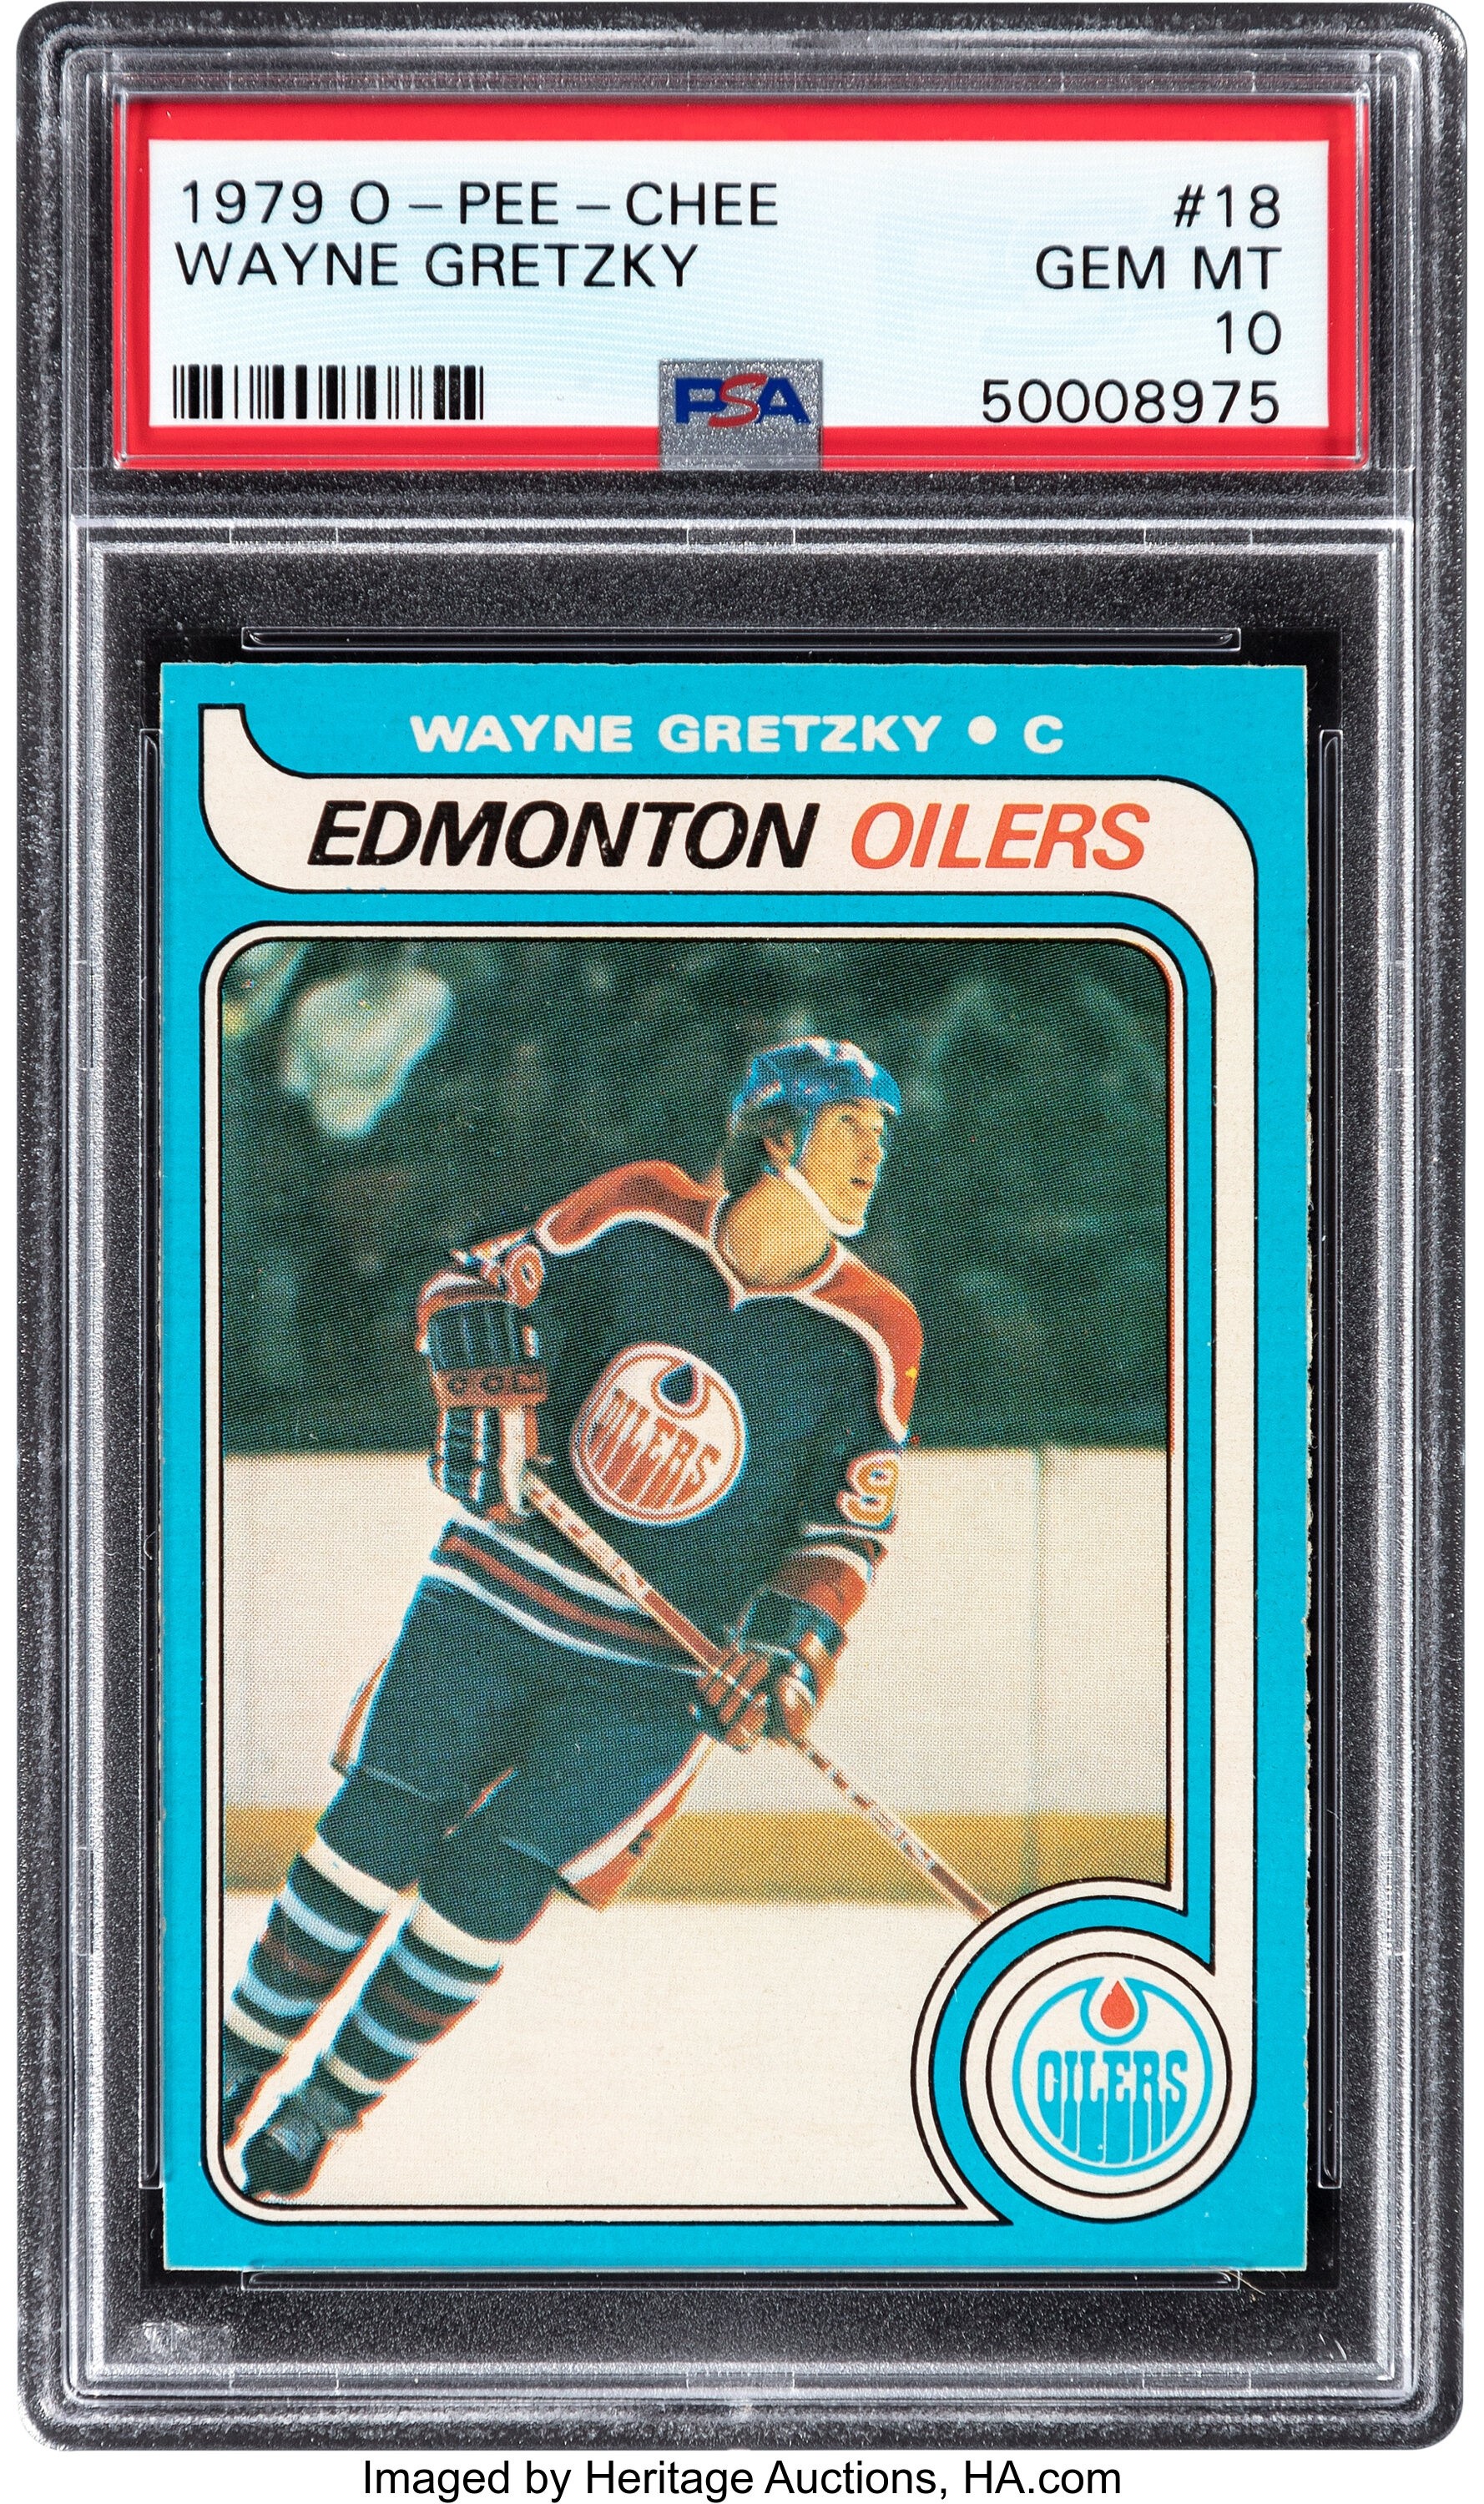 Wayne Gretzky sets another record as his rookie card sells for ...